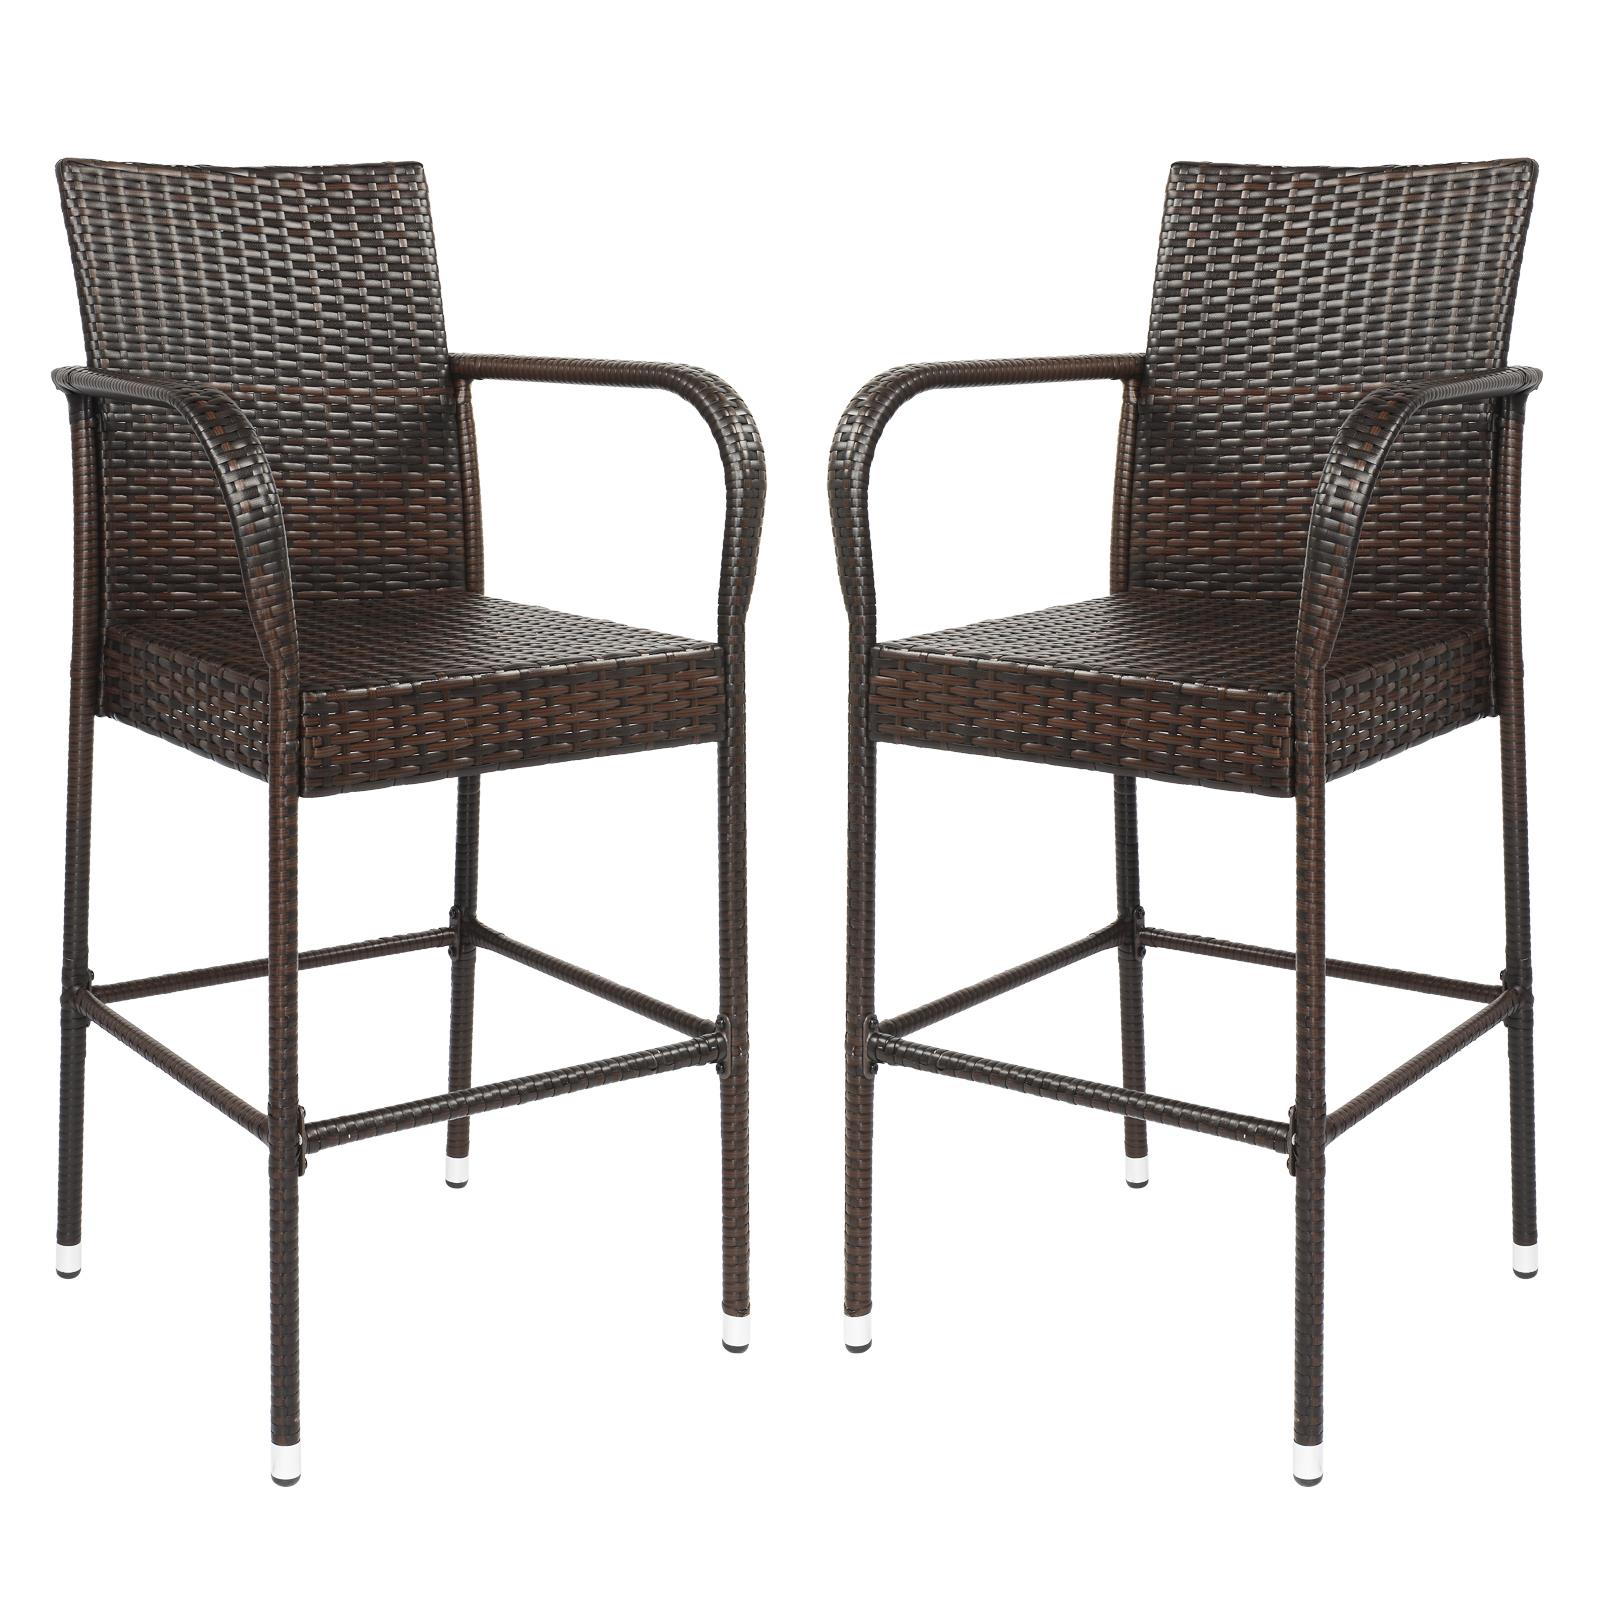 SamyoHome Wicker Bar Stools Outdoor Set of 2, Outdoor Bar Chairs - image 2 of 11